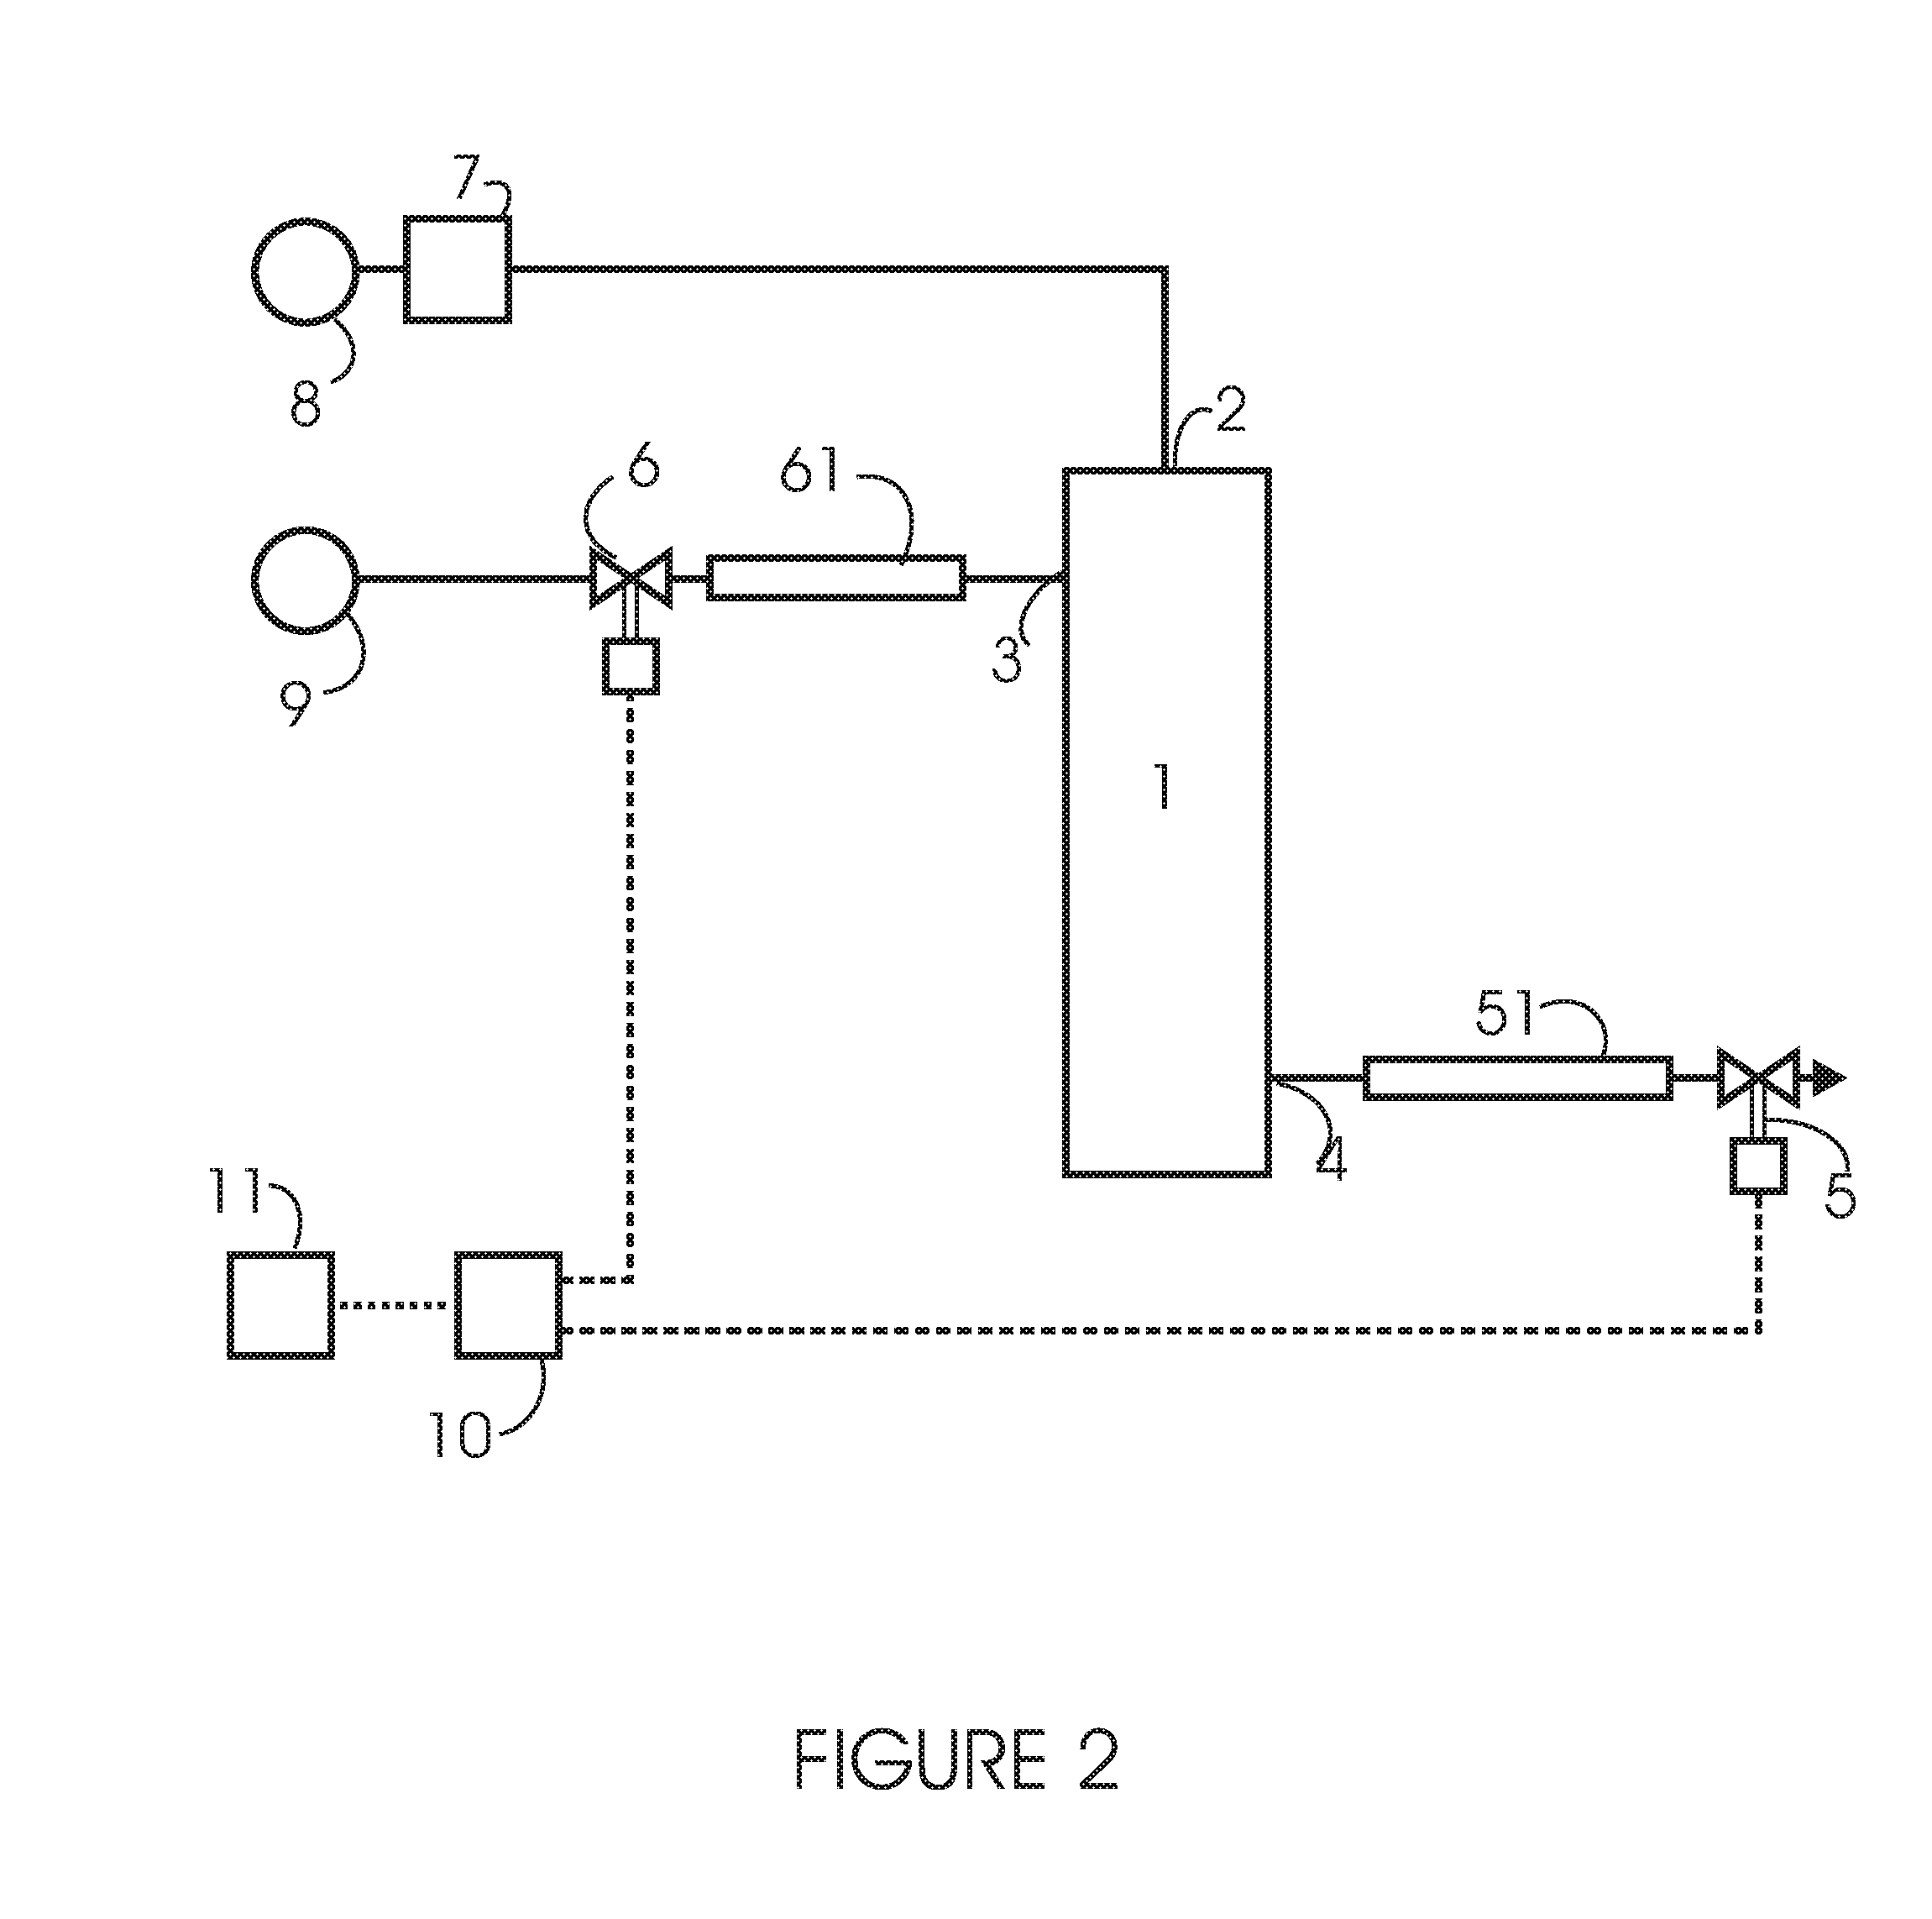 Producing or Dispensing Liquid Products